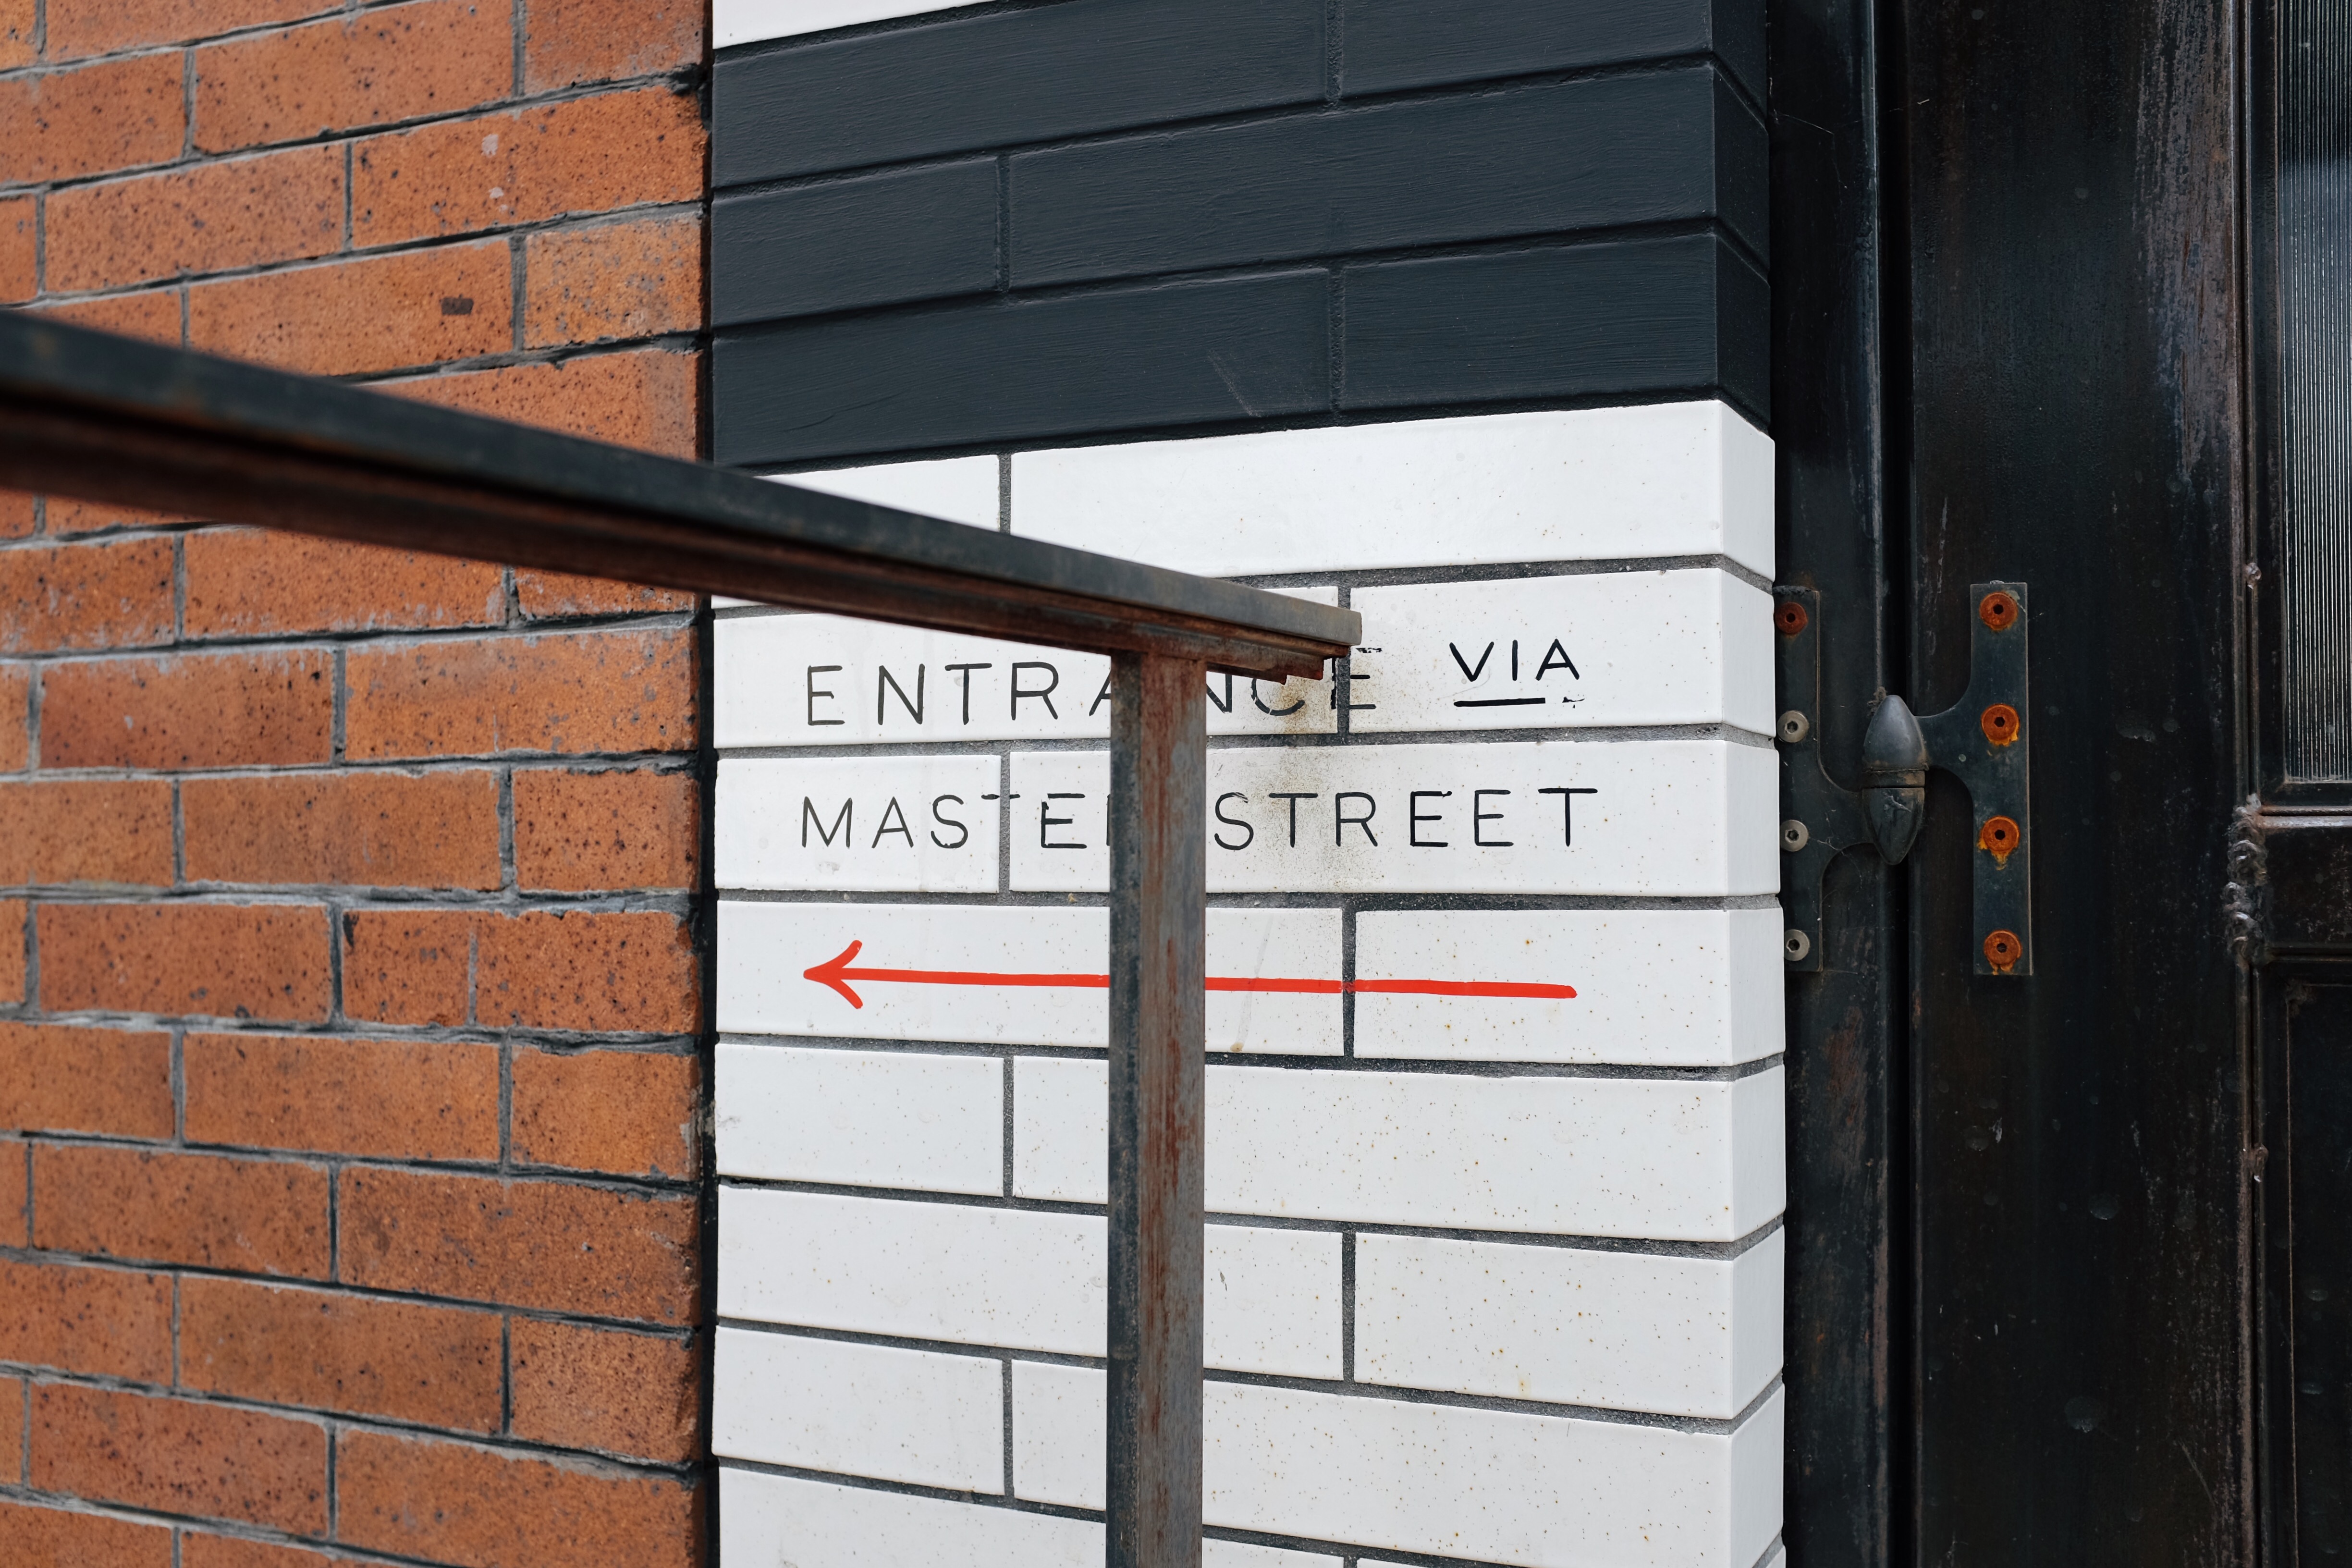 Right view of sign saying “Entrance via Master Street” cut off by hand rail